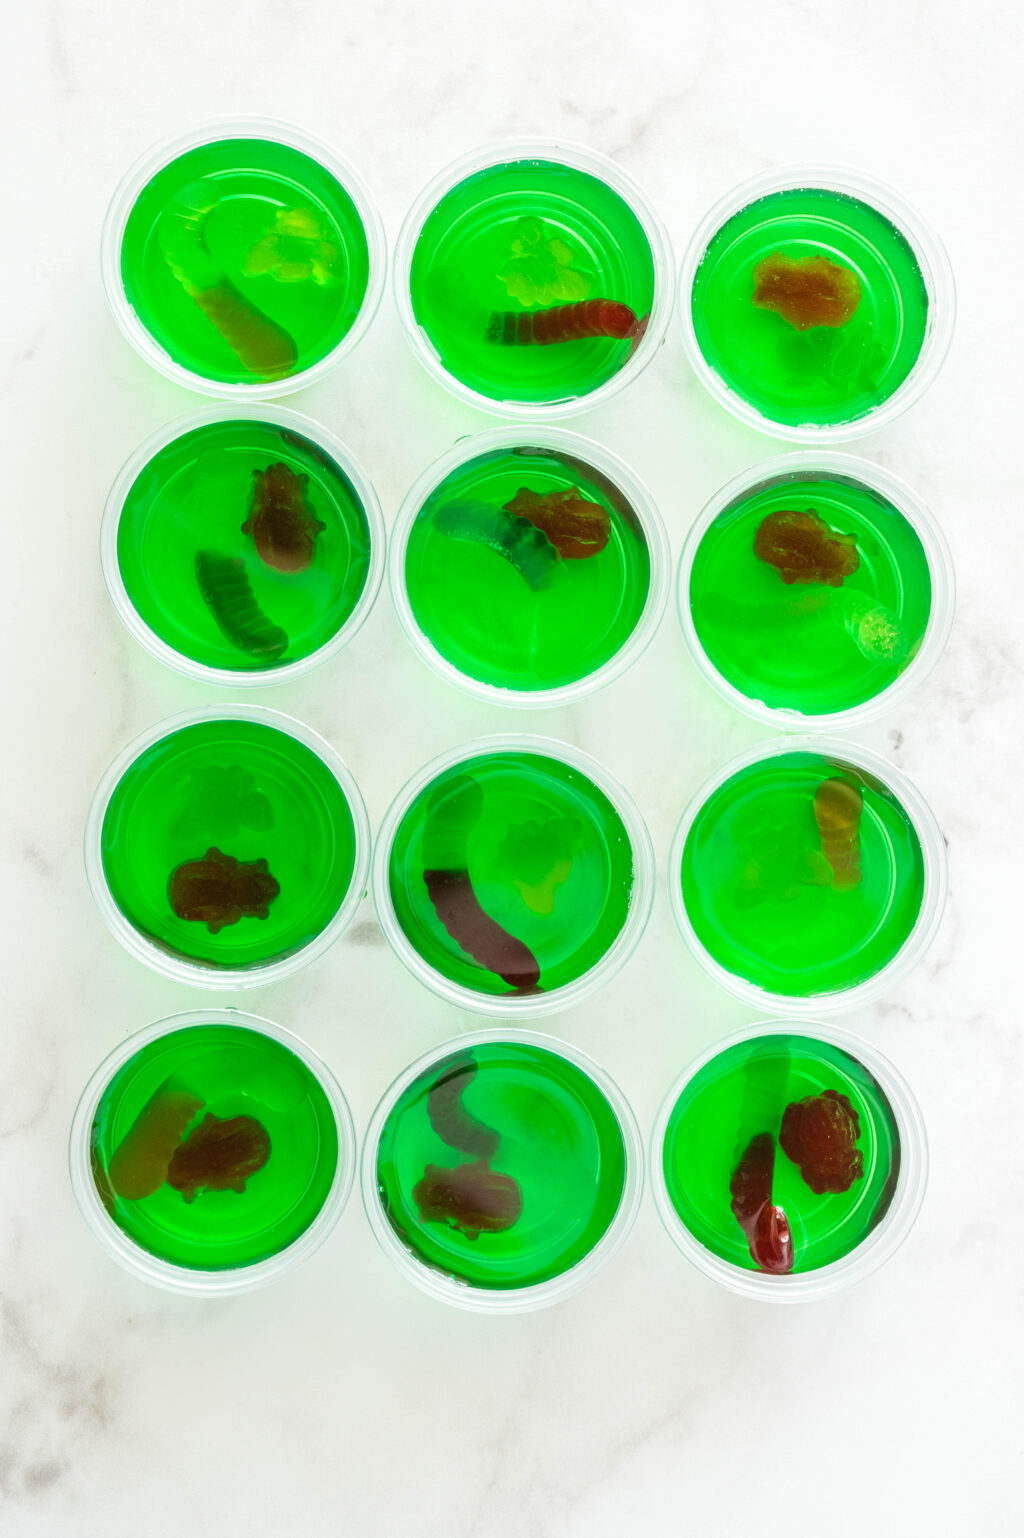 cups filled with green jello and gummy candies